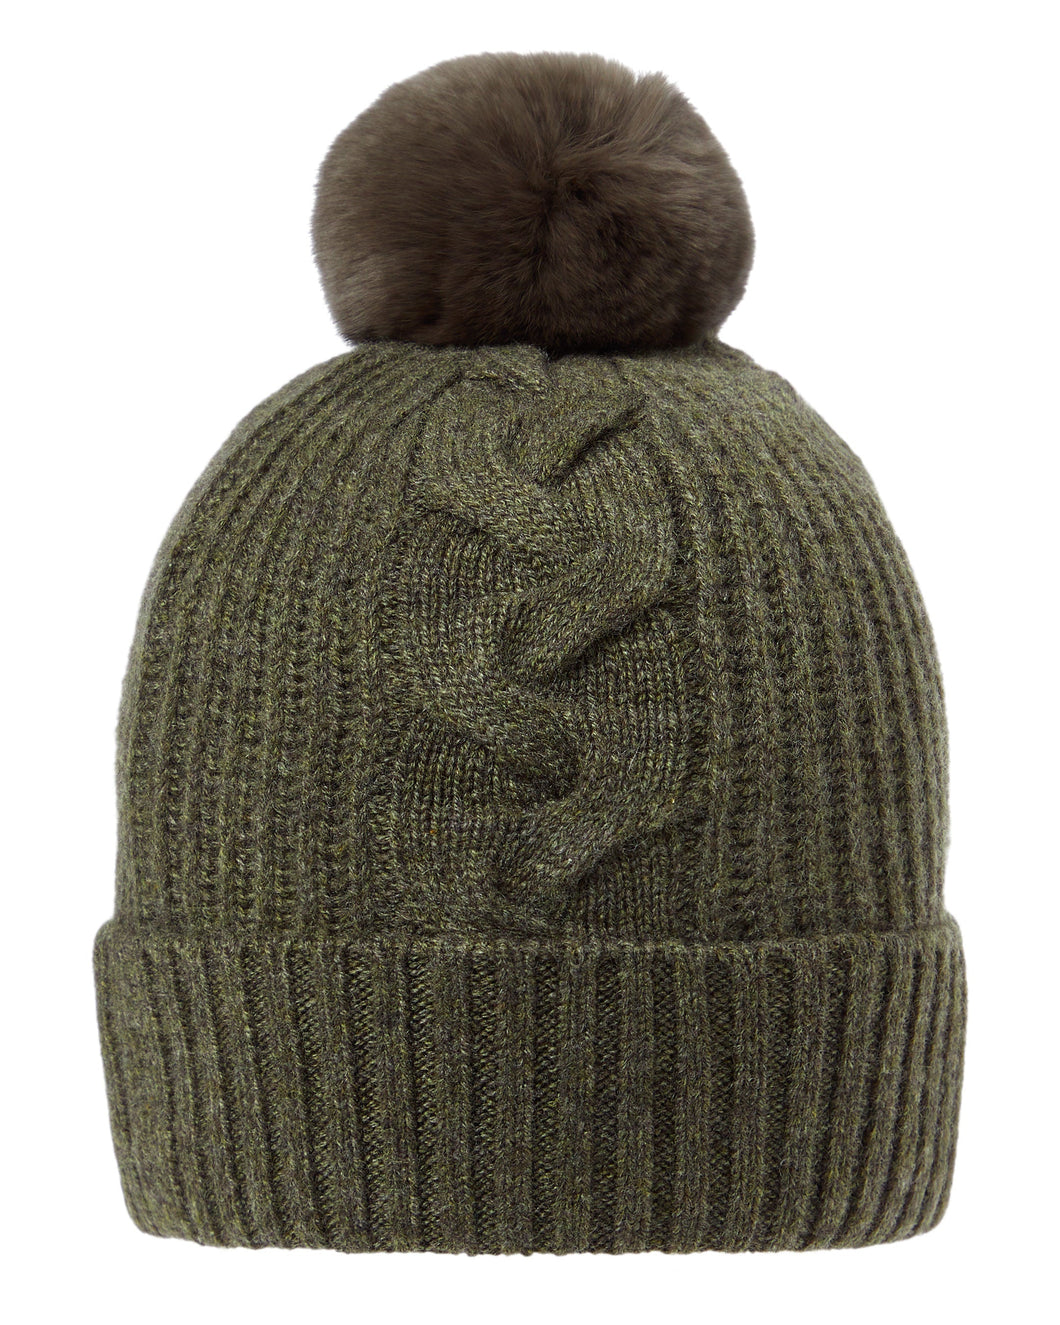 N.Peal Women's Fur Bobble Cable Hat Moss Green